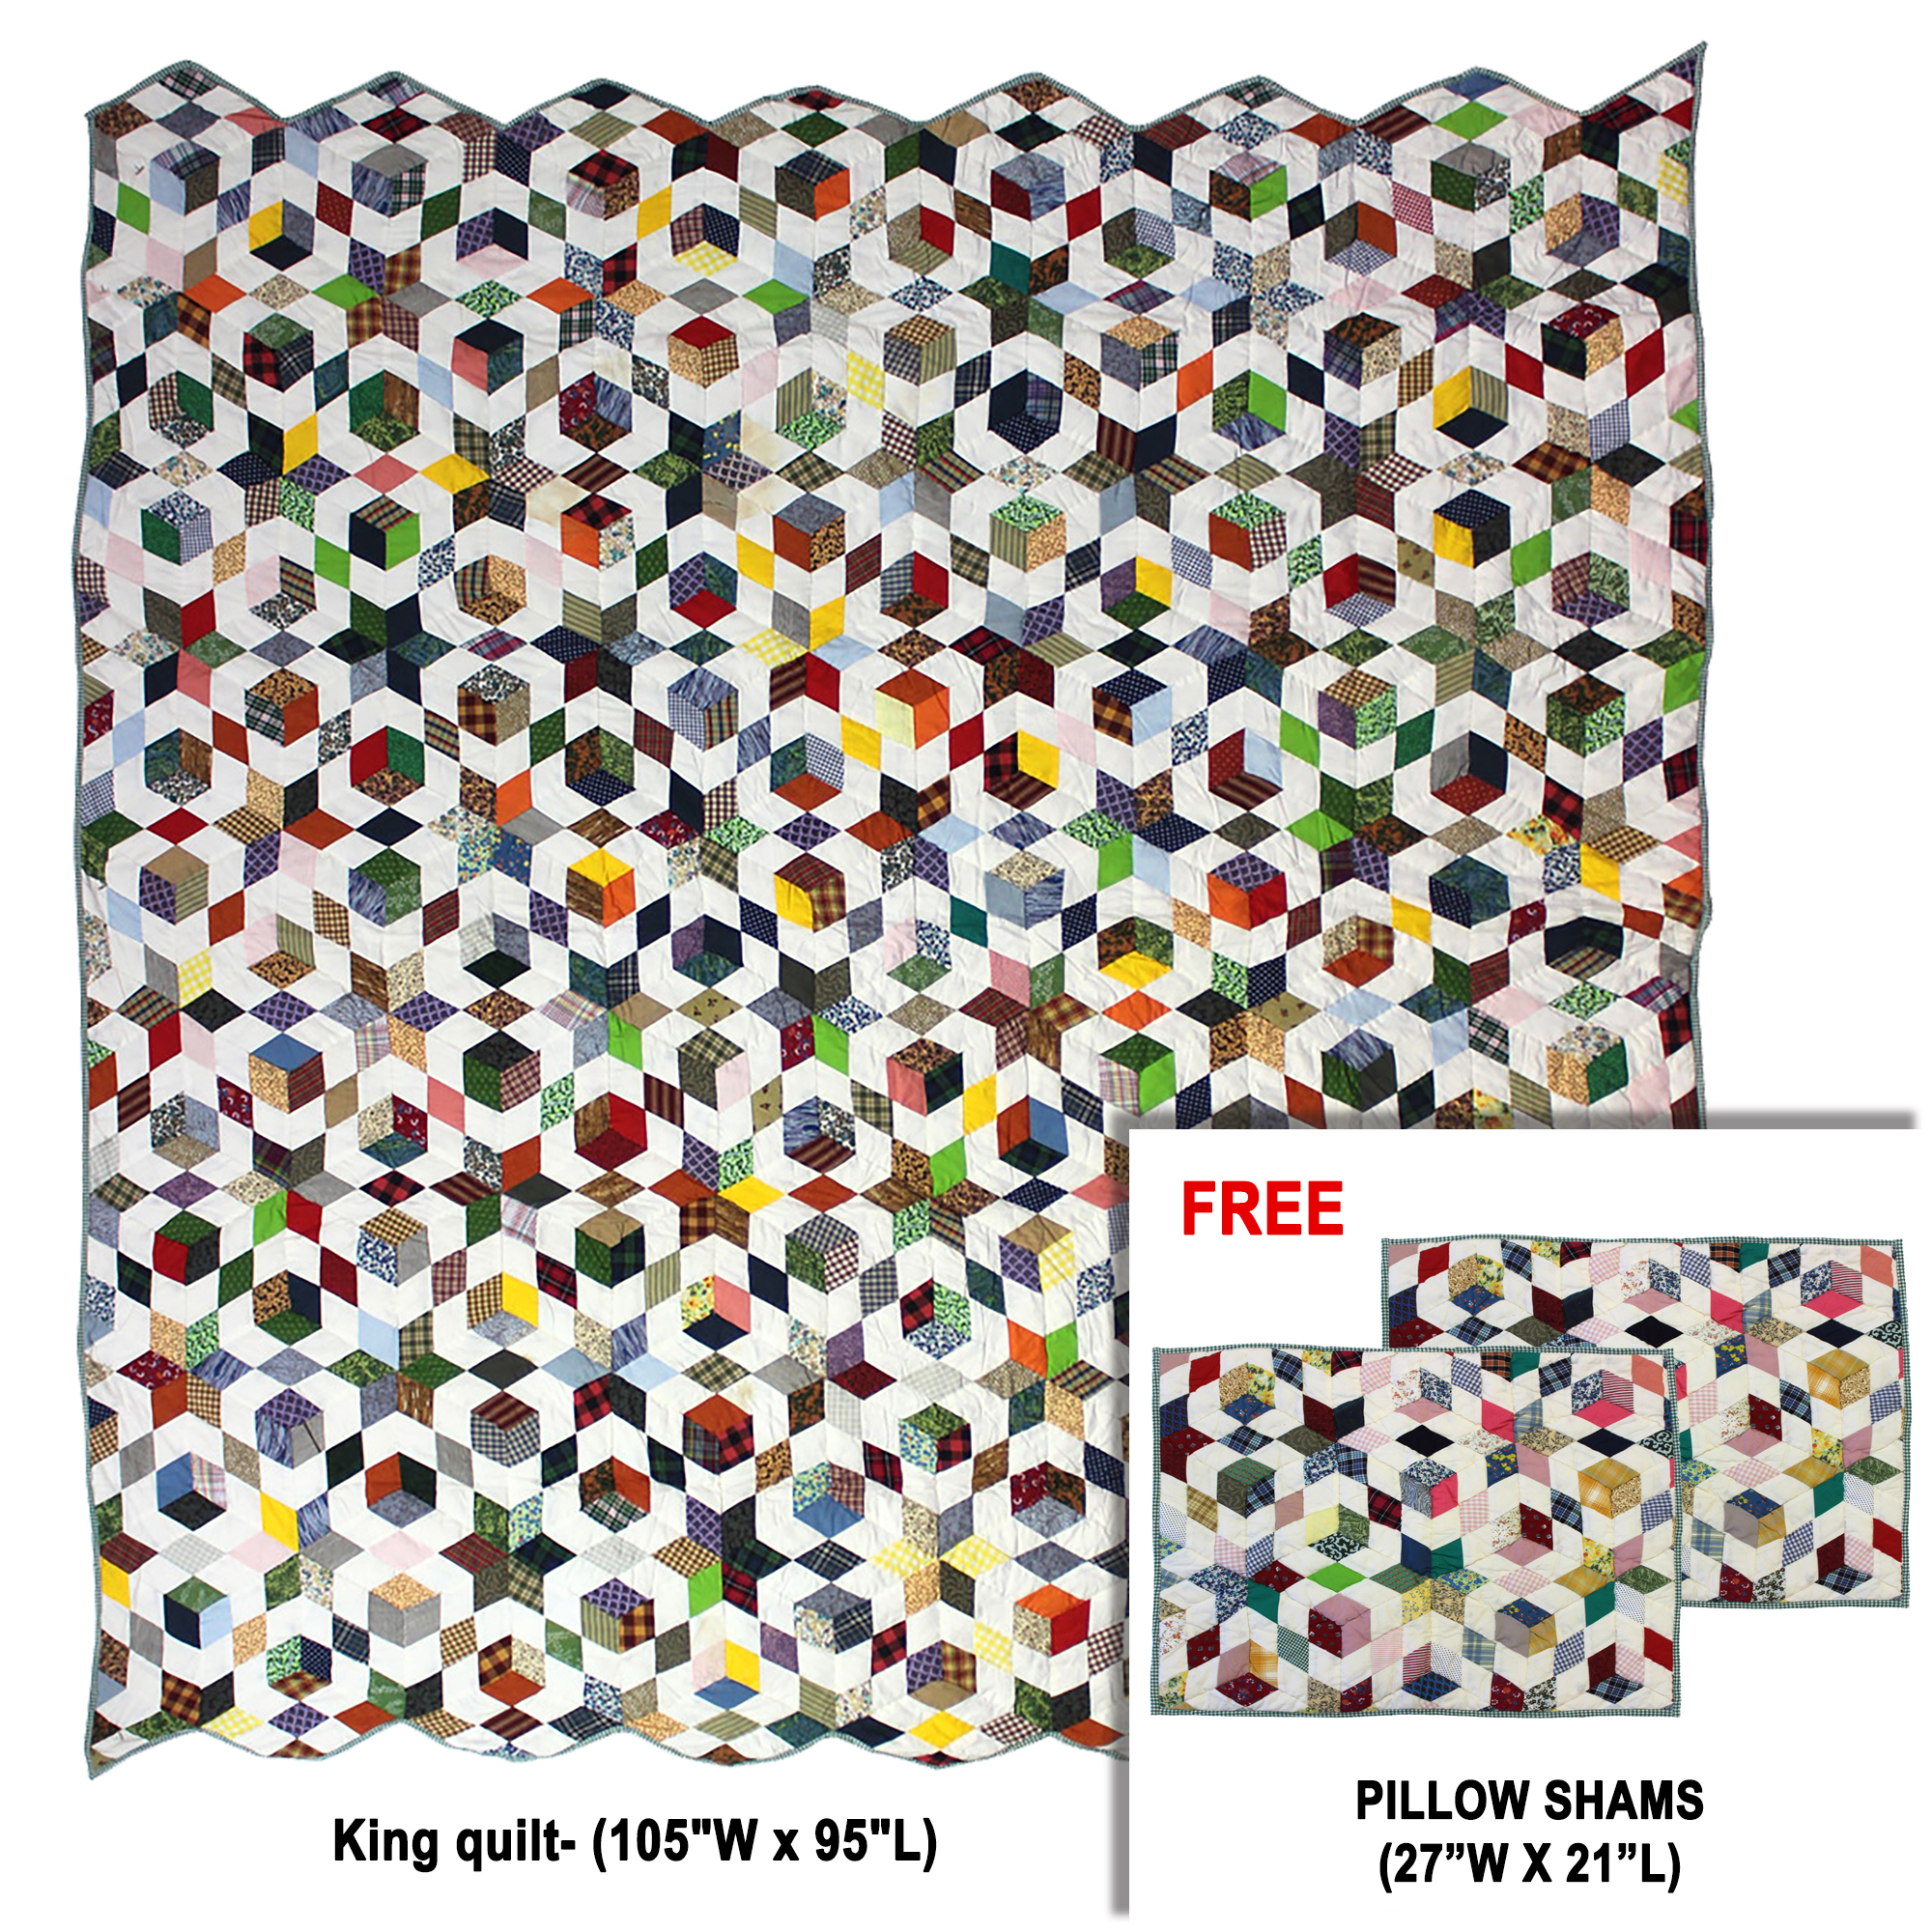 Granma Memories King Quilt 105"W x 95"L | Buy a King Quilt and get a Matching Pillow Shams (27"W x 21"L) FREE